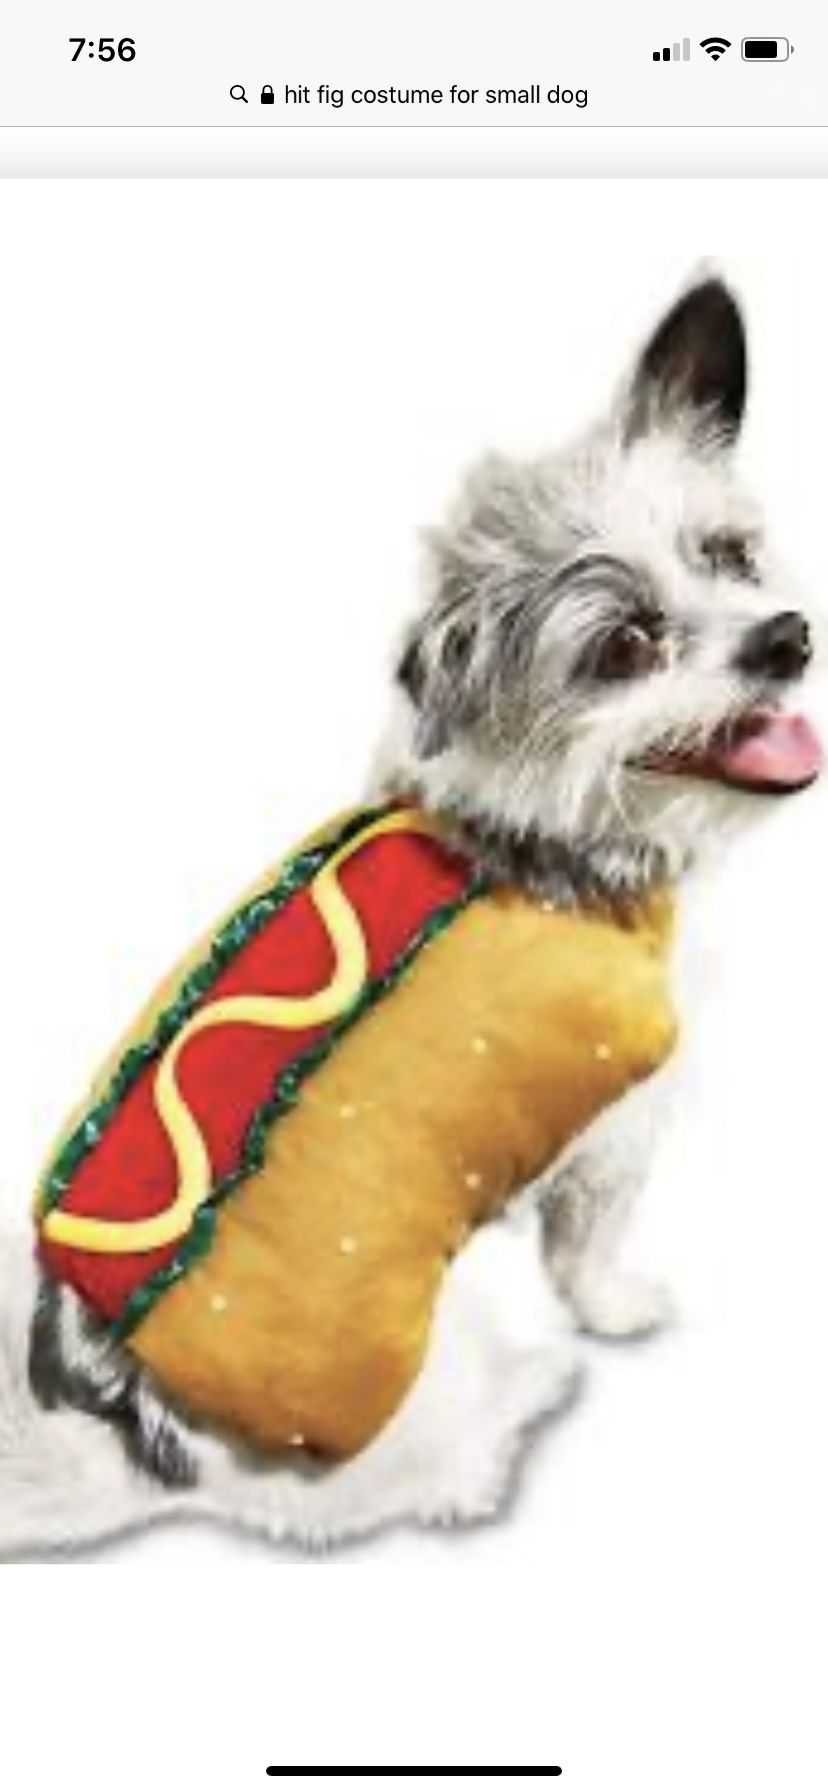 Hot dog costume for small dog - Halloween - size XS